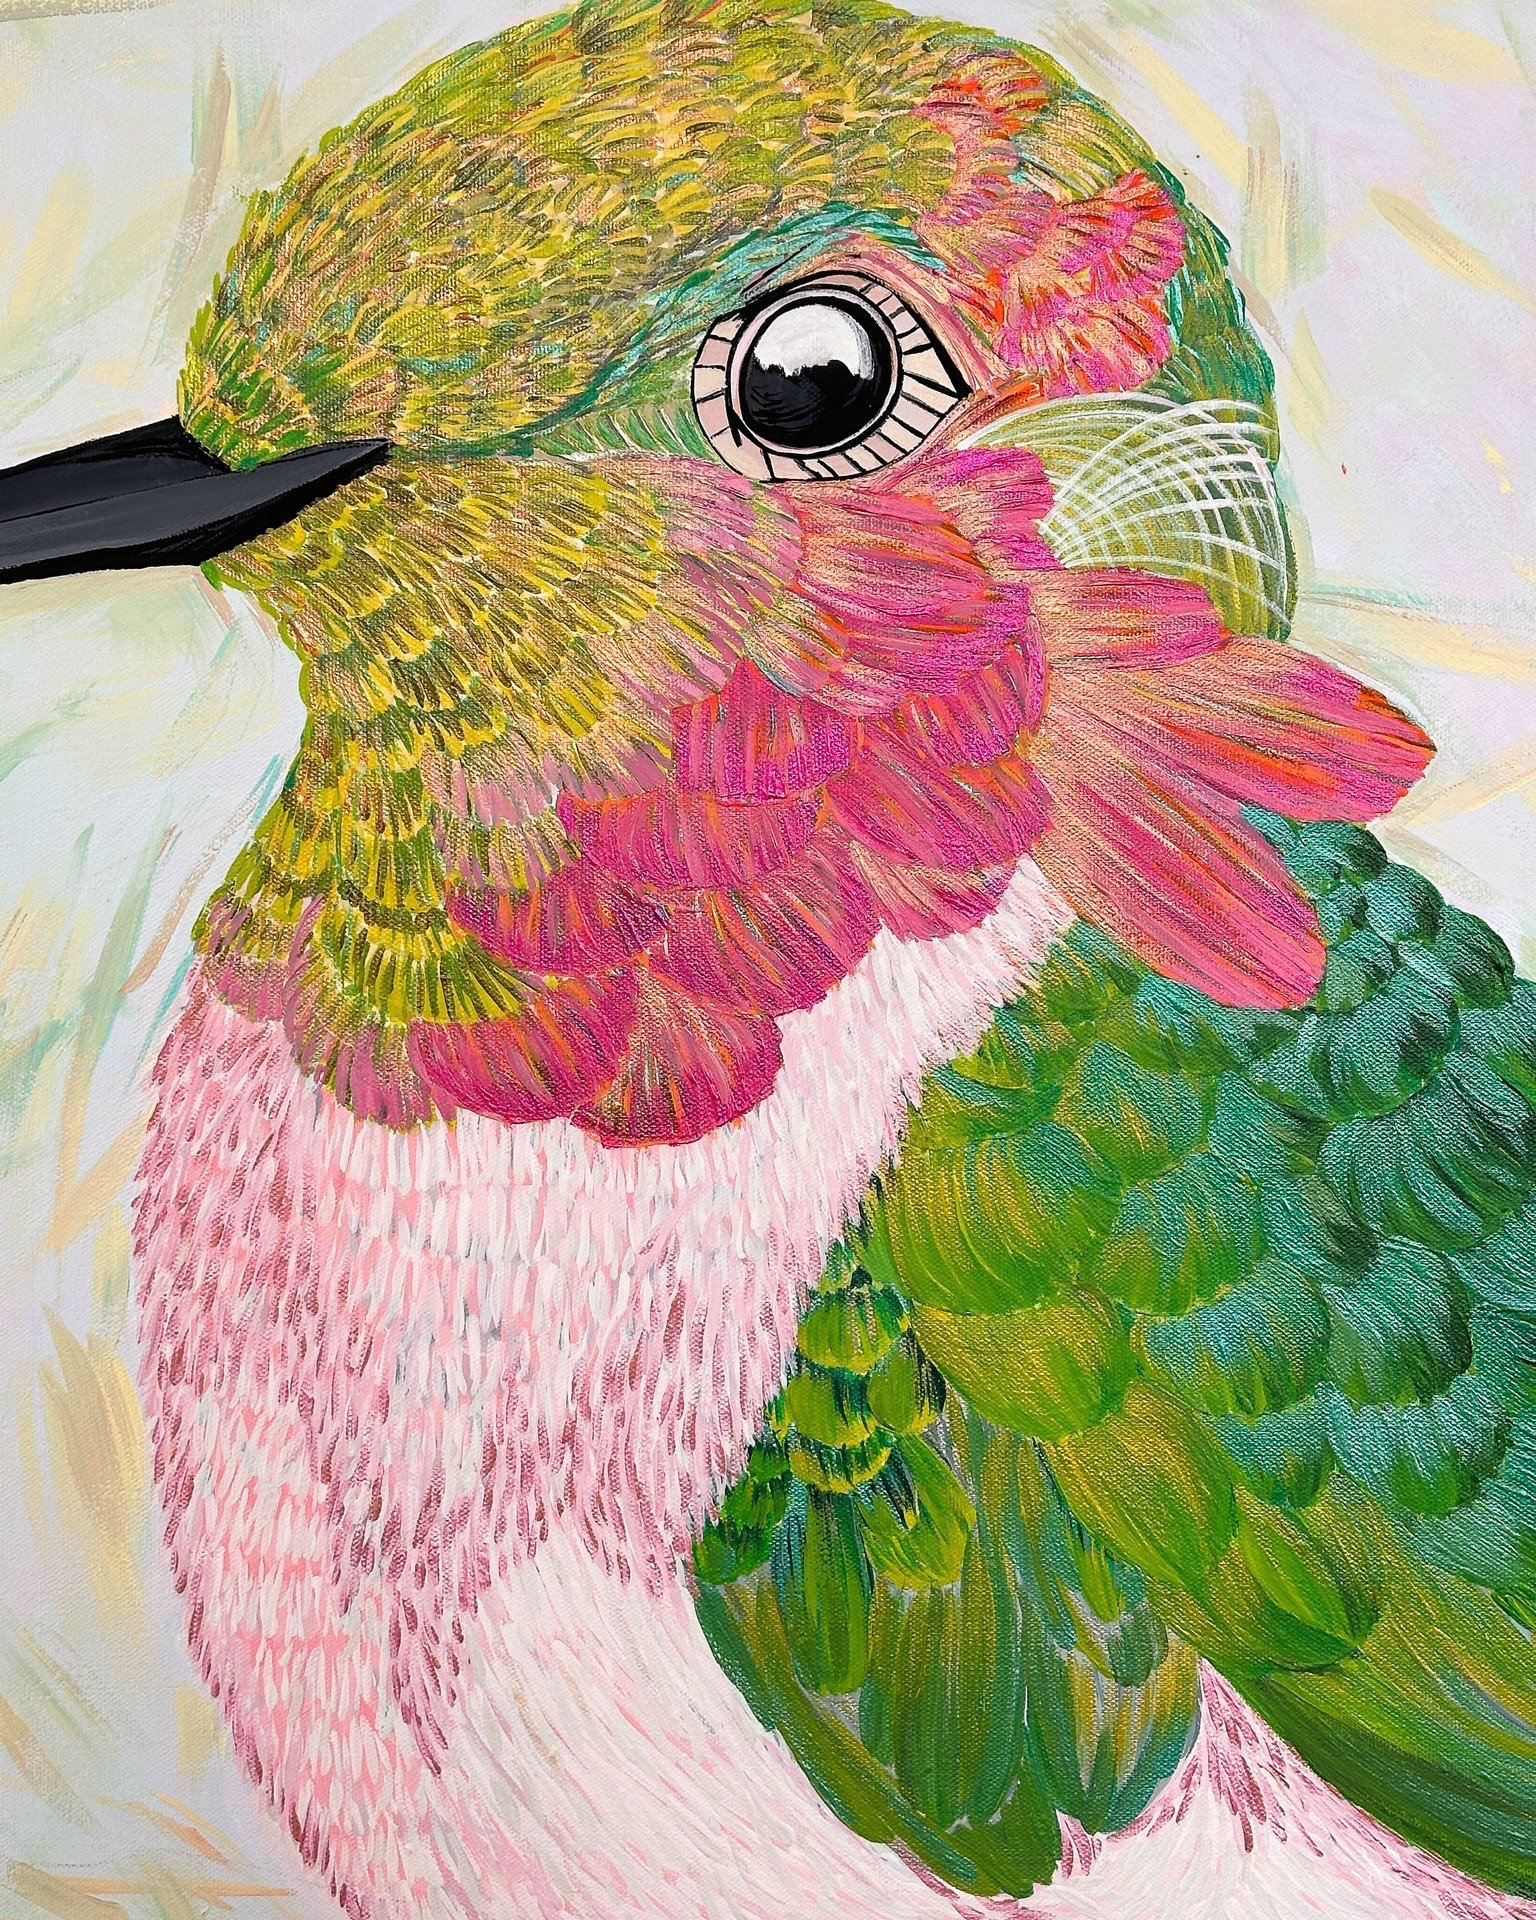 The watchful eye of a colibr&iacute; invites you to pause and enjoy the moment. 

&ldquo;Colibr&Iacute; Graze&ldquo; is an 24x36 inches acrylic on canvas that  encapsulates the spirit of a hummingbird through vibrant colors and peaceful expressions, 